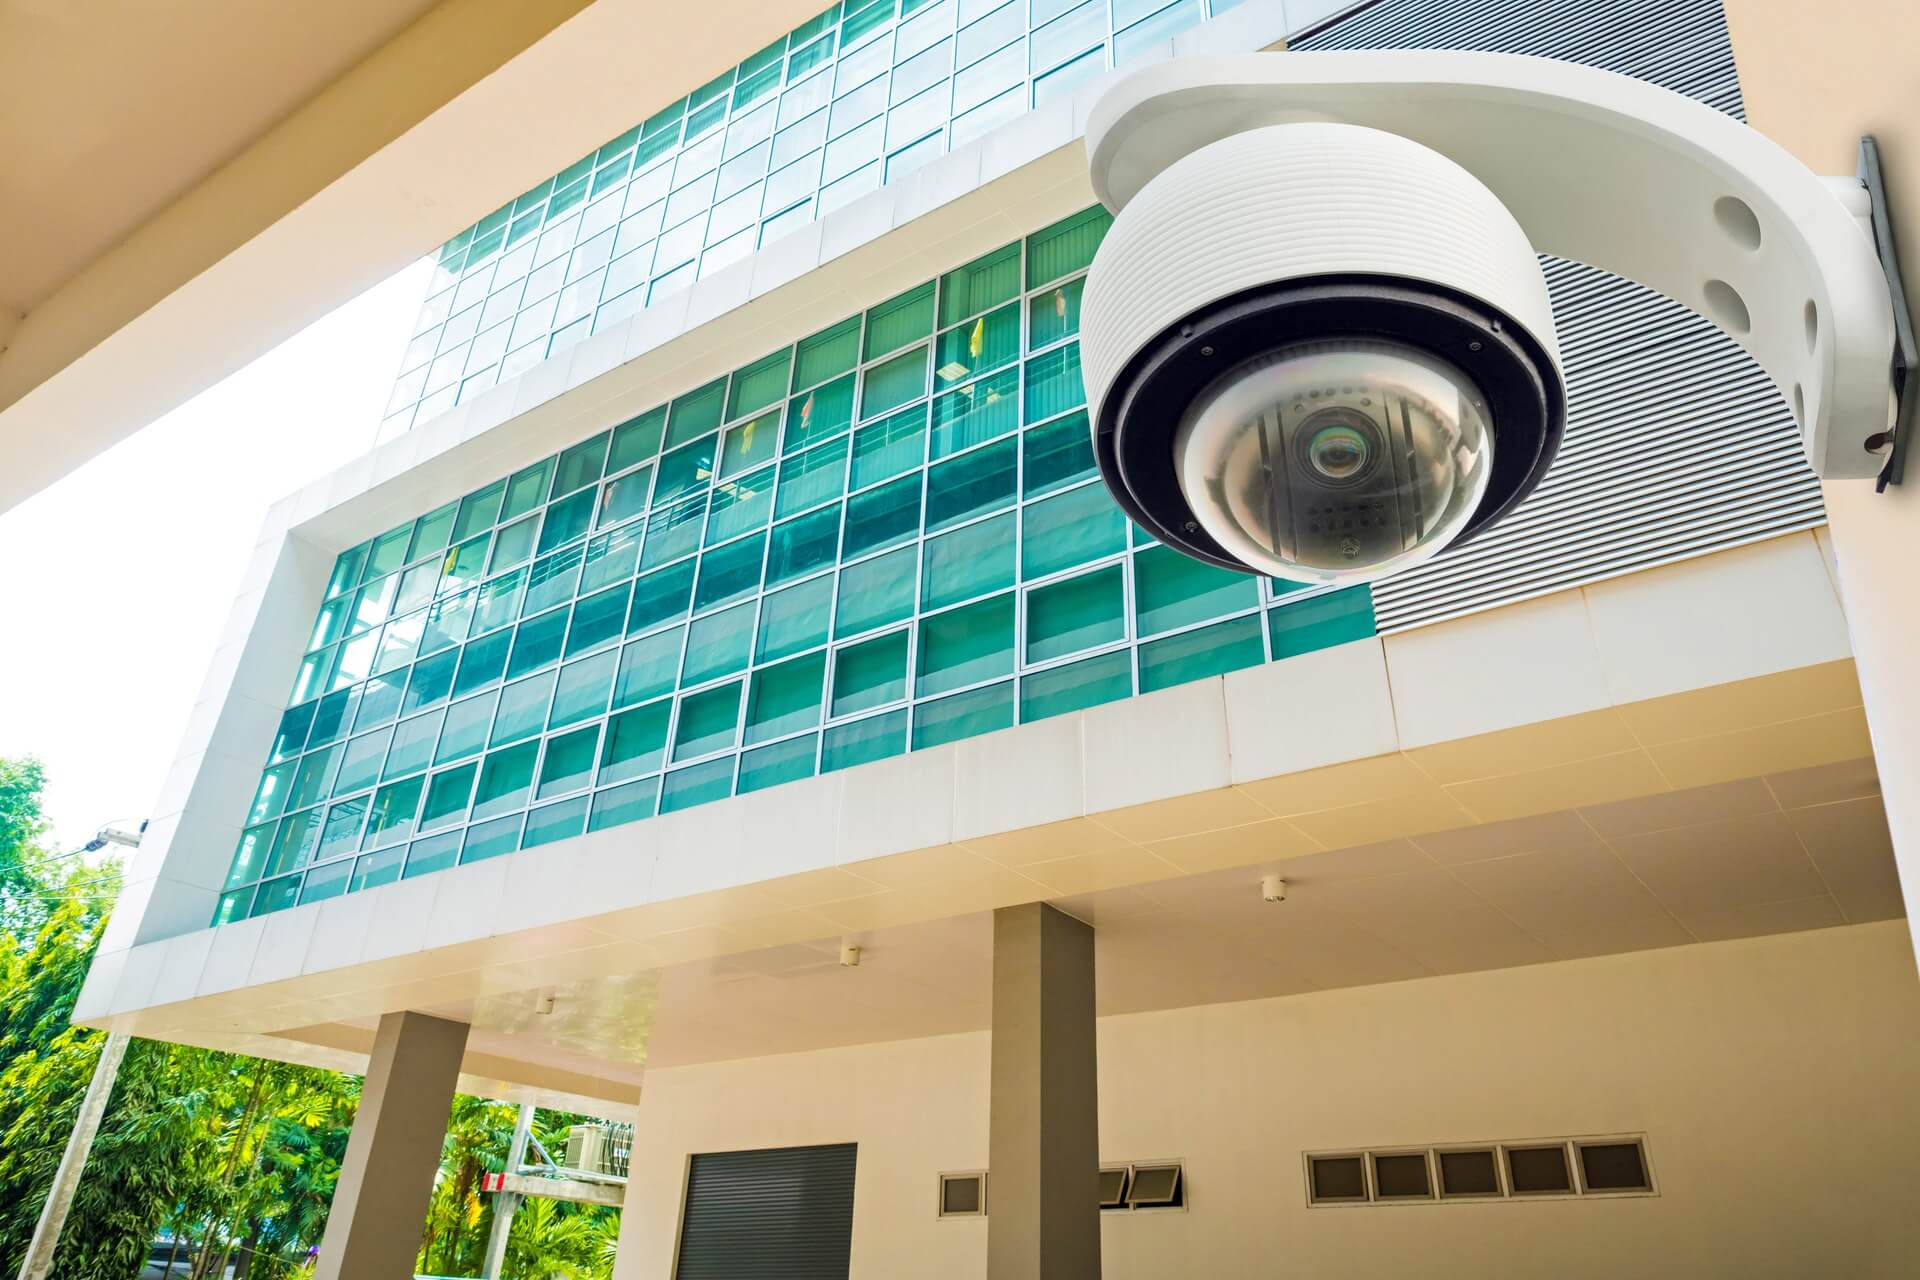 A white domed CCTV camera outside a building.